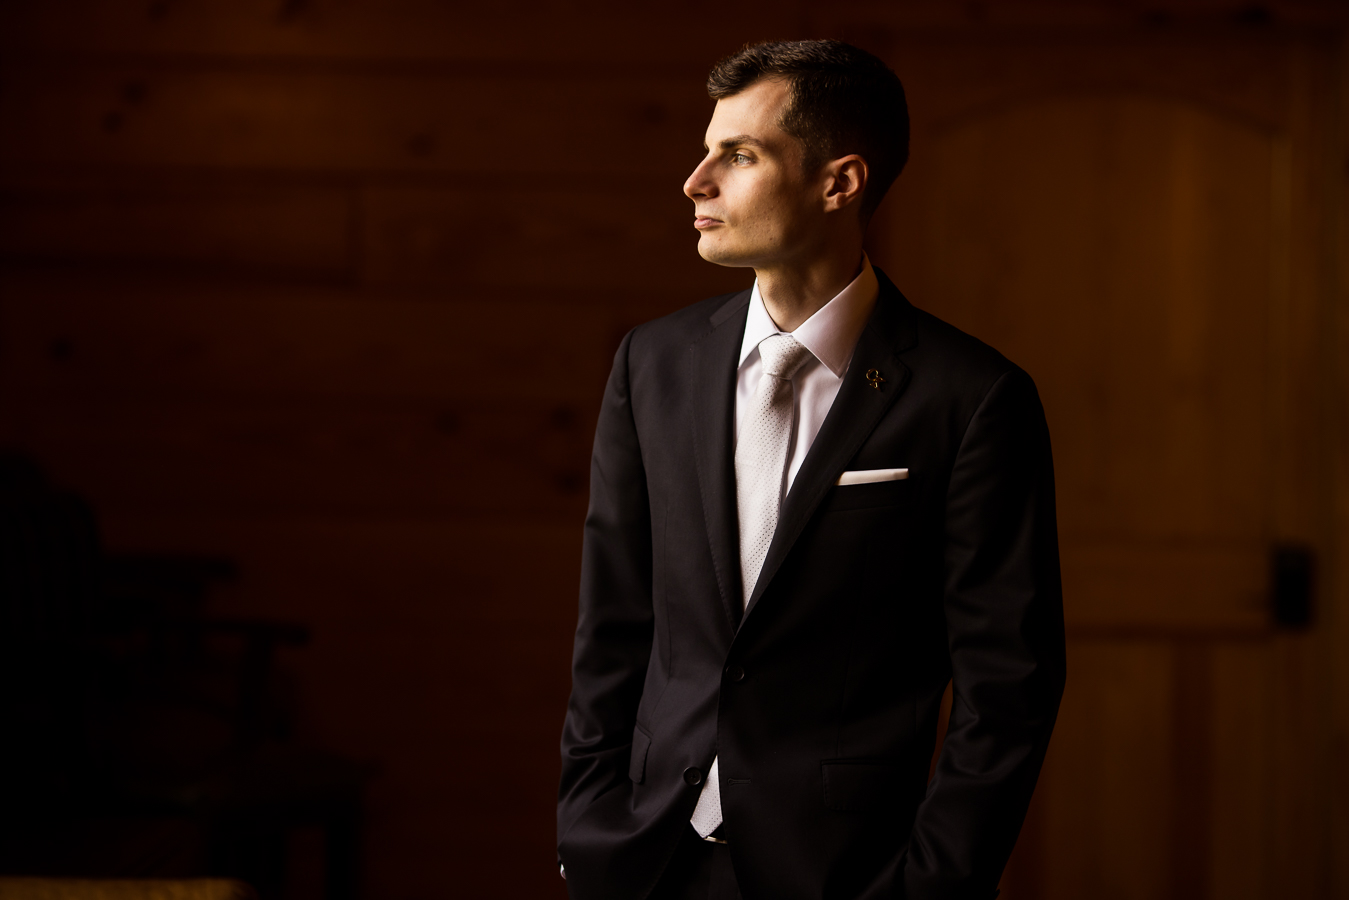 Middleburg Barn Wedding Photographer, captures this image of the groom as he stares off into the distance lit by dramatic lighting